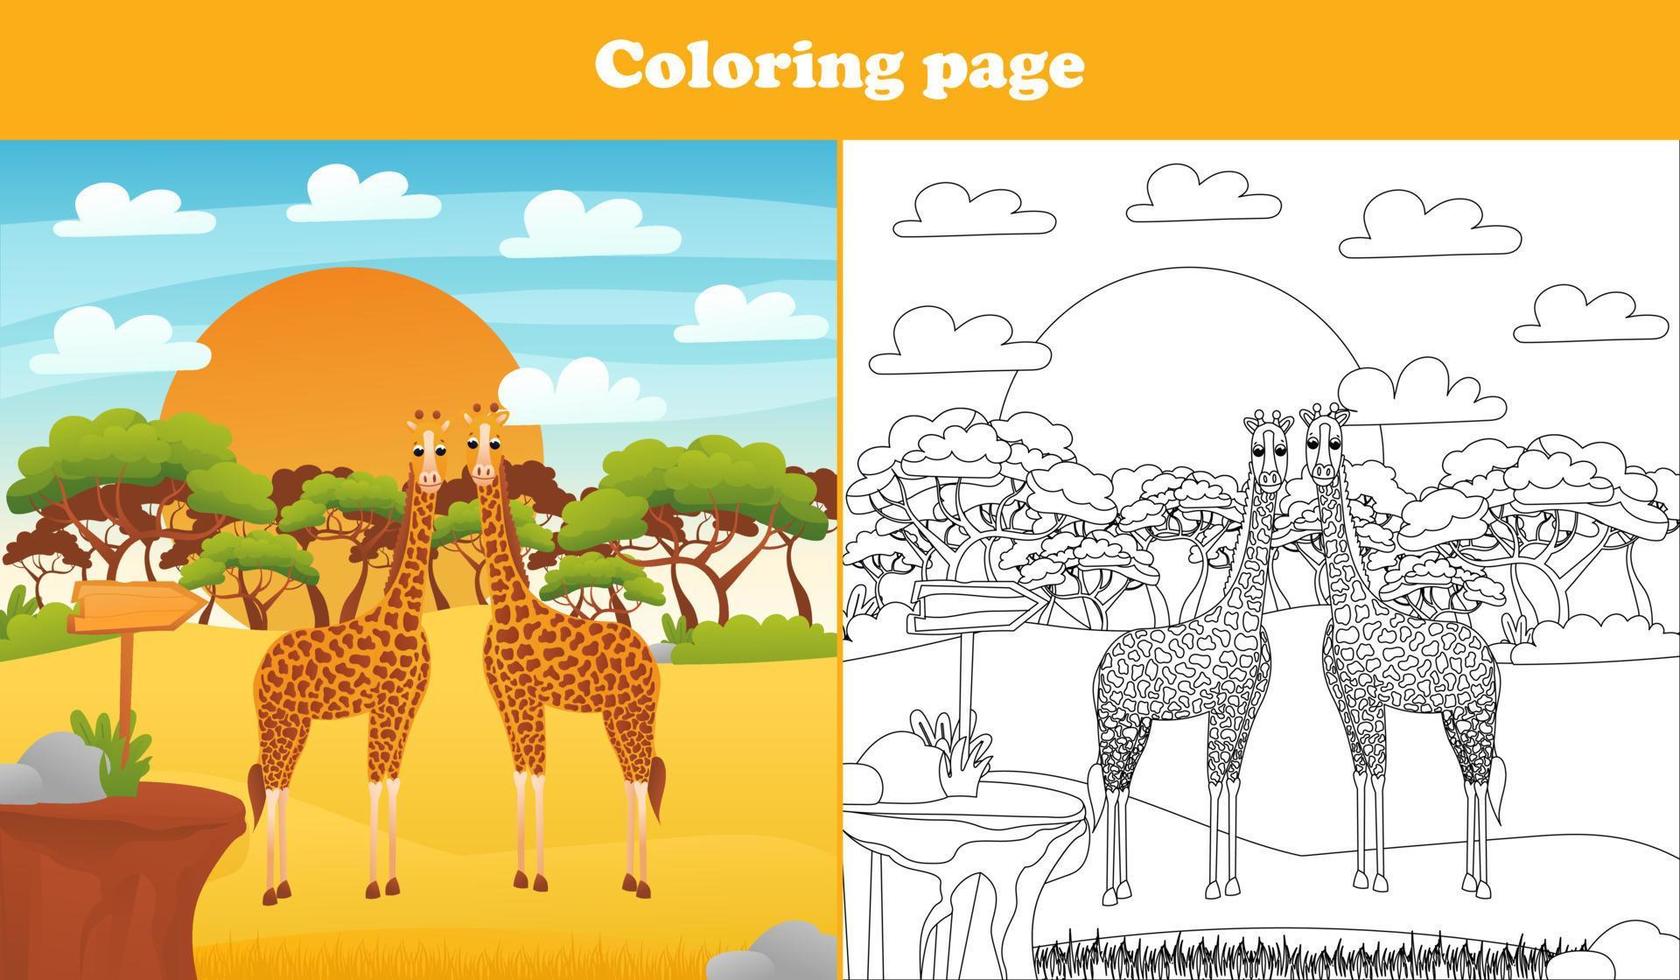 Safari desert landscape for kids with cute animal characters - giraffes, coloring page for children books, printable worksheet in cartoon style for school, animal wildlife theme vector